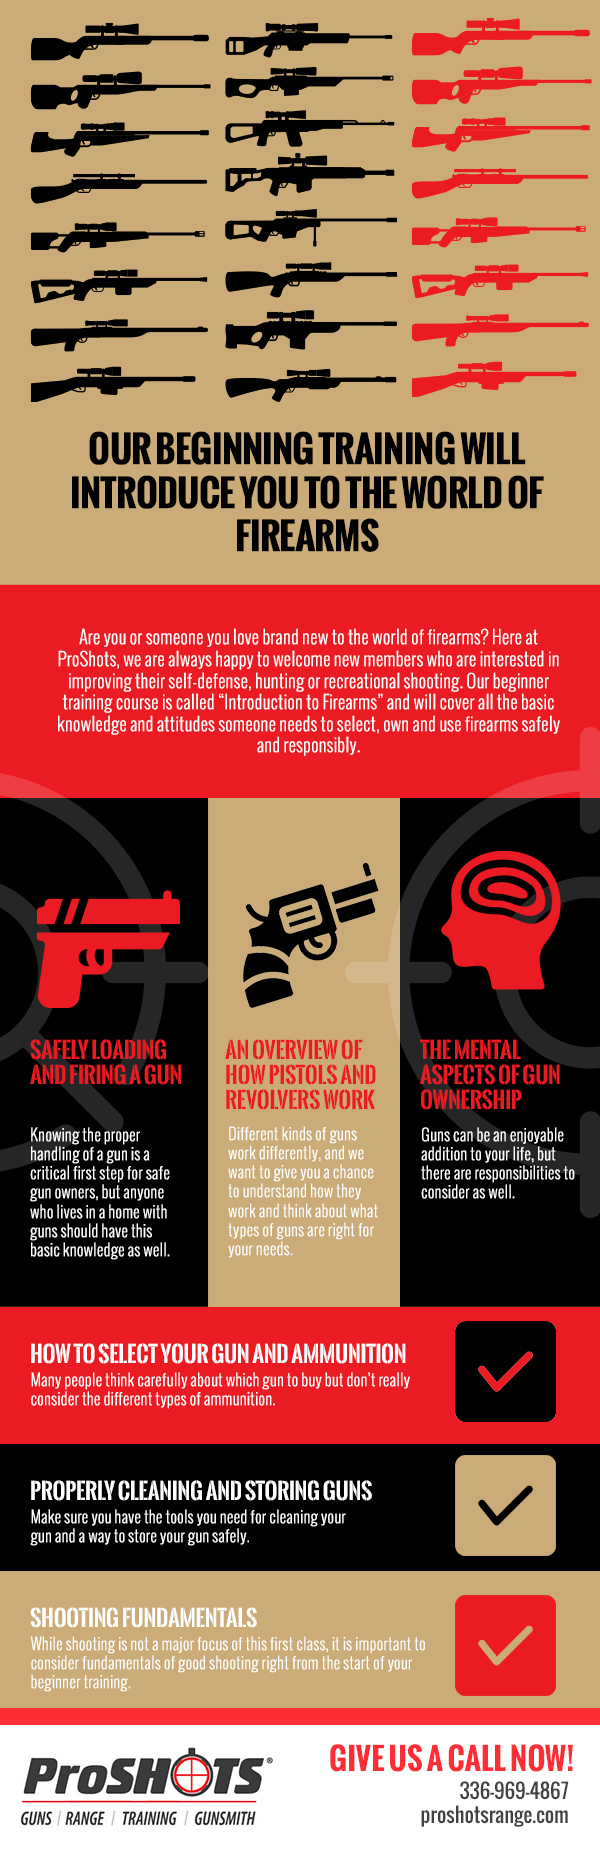 Our Beginning Training Will Introduce You to the World of Firearms [infographic]